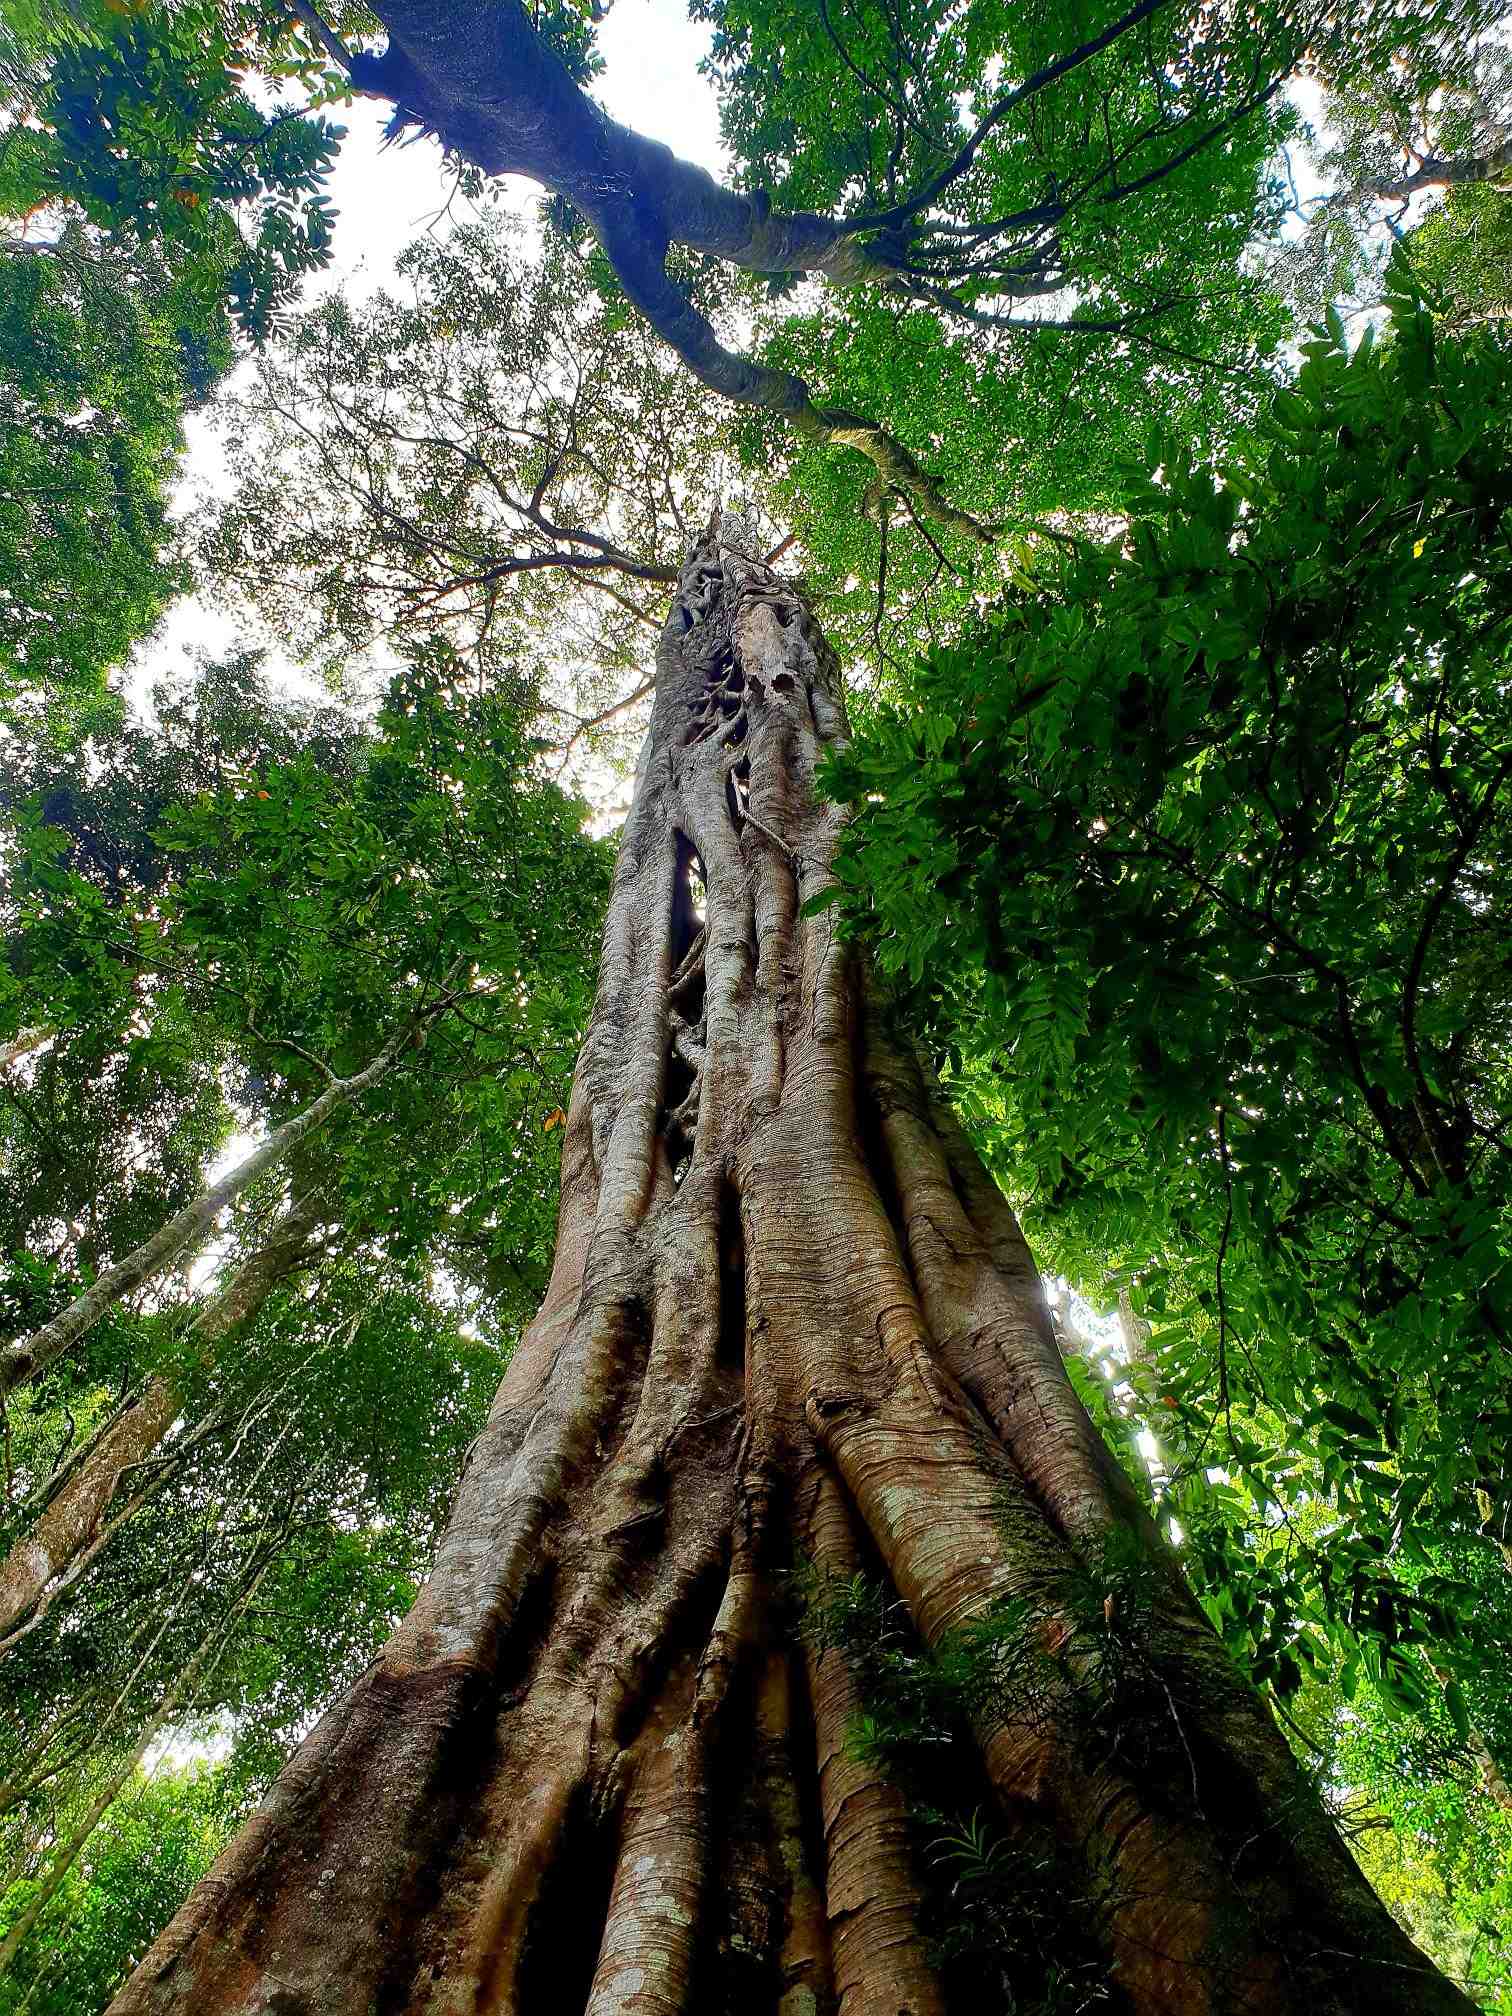 View of large tree in the gondwana rainforest 